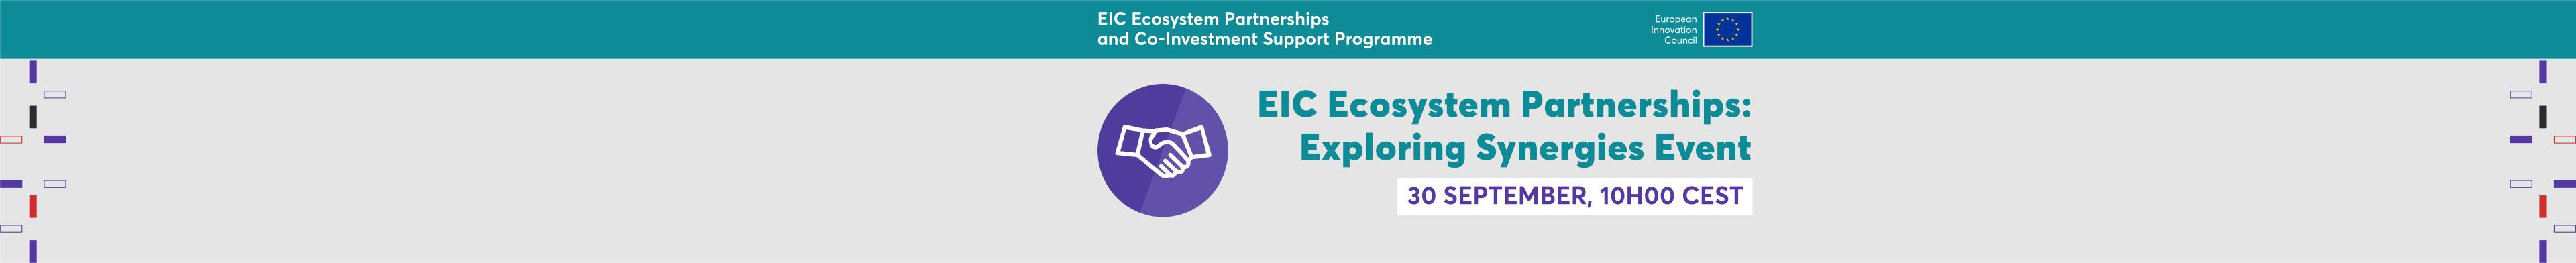 Banner for the EIC Ecosystem Partnerships: Exploring Synergies